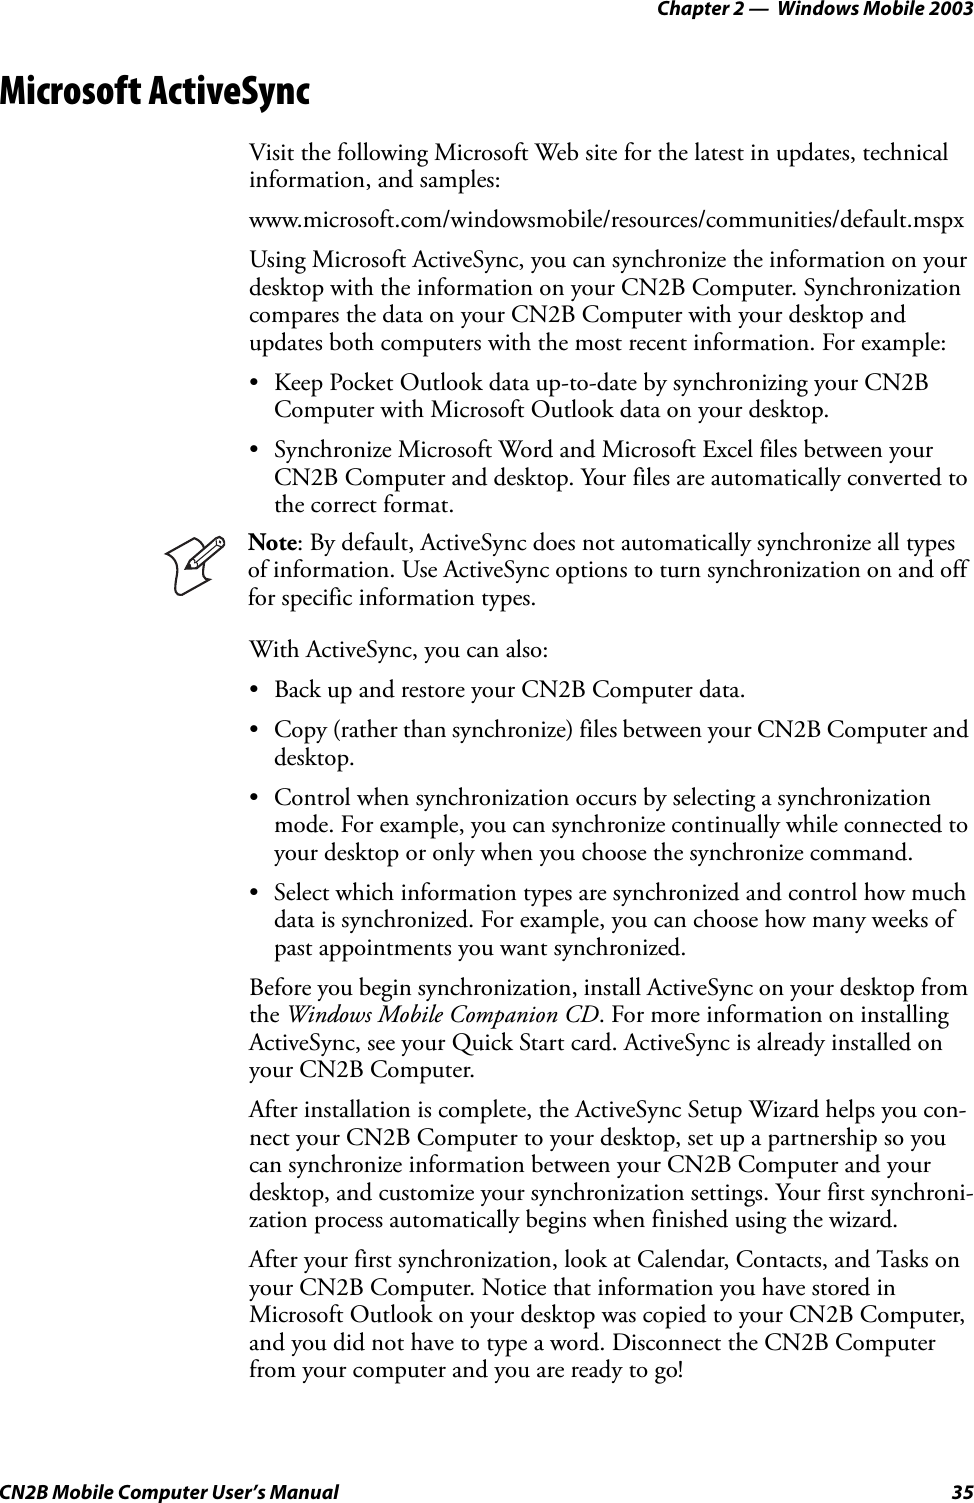 Chapter 2 —  Windows Mobile 2003CN2B Mobile Computer User’s Manual 35Microsoft ActiveSyncVisit the following Microsoft Web site for the latest in updates, technical information, and samples:www.microsoft.com/windowsmobile/resources/communities/default.mspxUsing Microsoft ActiveSync, you can synchronize the information on your desktop with the information on your CN2B Computer. Synchronization compares the data on your CN2B Computer with your desktop and updates both computers with the most recent information. For example:• Keep Pocket Outlook data up-to-date by synchronizing your CN2B Computer with Microsoft Outlook data on your desktop.• Synchronize Microsoft Word and Microsoft Excel files between your CN2B Computer and desktop. Your files are automatically converted to the correct format.With ActiveSync, you can also:• Back up and restore your CN2B Computer data.• Copy (rather than synchronize) files between your CN2B Computer and desktop.• Control when synchronization occurs by selecting a synchronization mode. For example, you can synchronize continually while connected to your desktop or only when you choose the synchronize command.• Select which information types are synchronized and control how much data is synchronized. For example, you can choose how many weeks of past appointments you want synchronized.Before you begin synchronization, install ActiveSync on your desktop from the Windows Mobile Companion CD. For more information on installing ActiveSync, see your Quick Start card. ActiveSync is already installed on your CN2B Computer.After installation is complete, the ActiveSync Setup Wizard helps you con-nect your CN2B Computer to your desktop, set up a partnership so you can synchronize information between your CN2B Computer and your desktop, and customize your synchronization settings. Your first synchroni-zation process automatically begins when finished using the wizard.After your first synchronization, look at Calendar, Contacts, and Tasks on your CN2B Computer. Notice that information you have stored in Microsoft Outlook on your desktop was copied to your CN2B Computer, and you did not have to type a word. Disconnect the CN2B Computer from your computer and you are ready to go!Note: By default, ActiveSync does not automatically synchronize all types of information. Use ActiveSync options to turn synchronization on and off for specific information types.